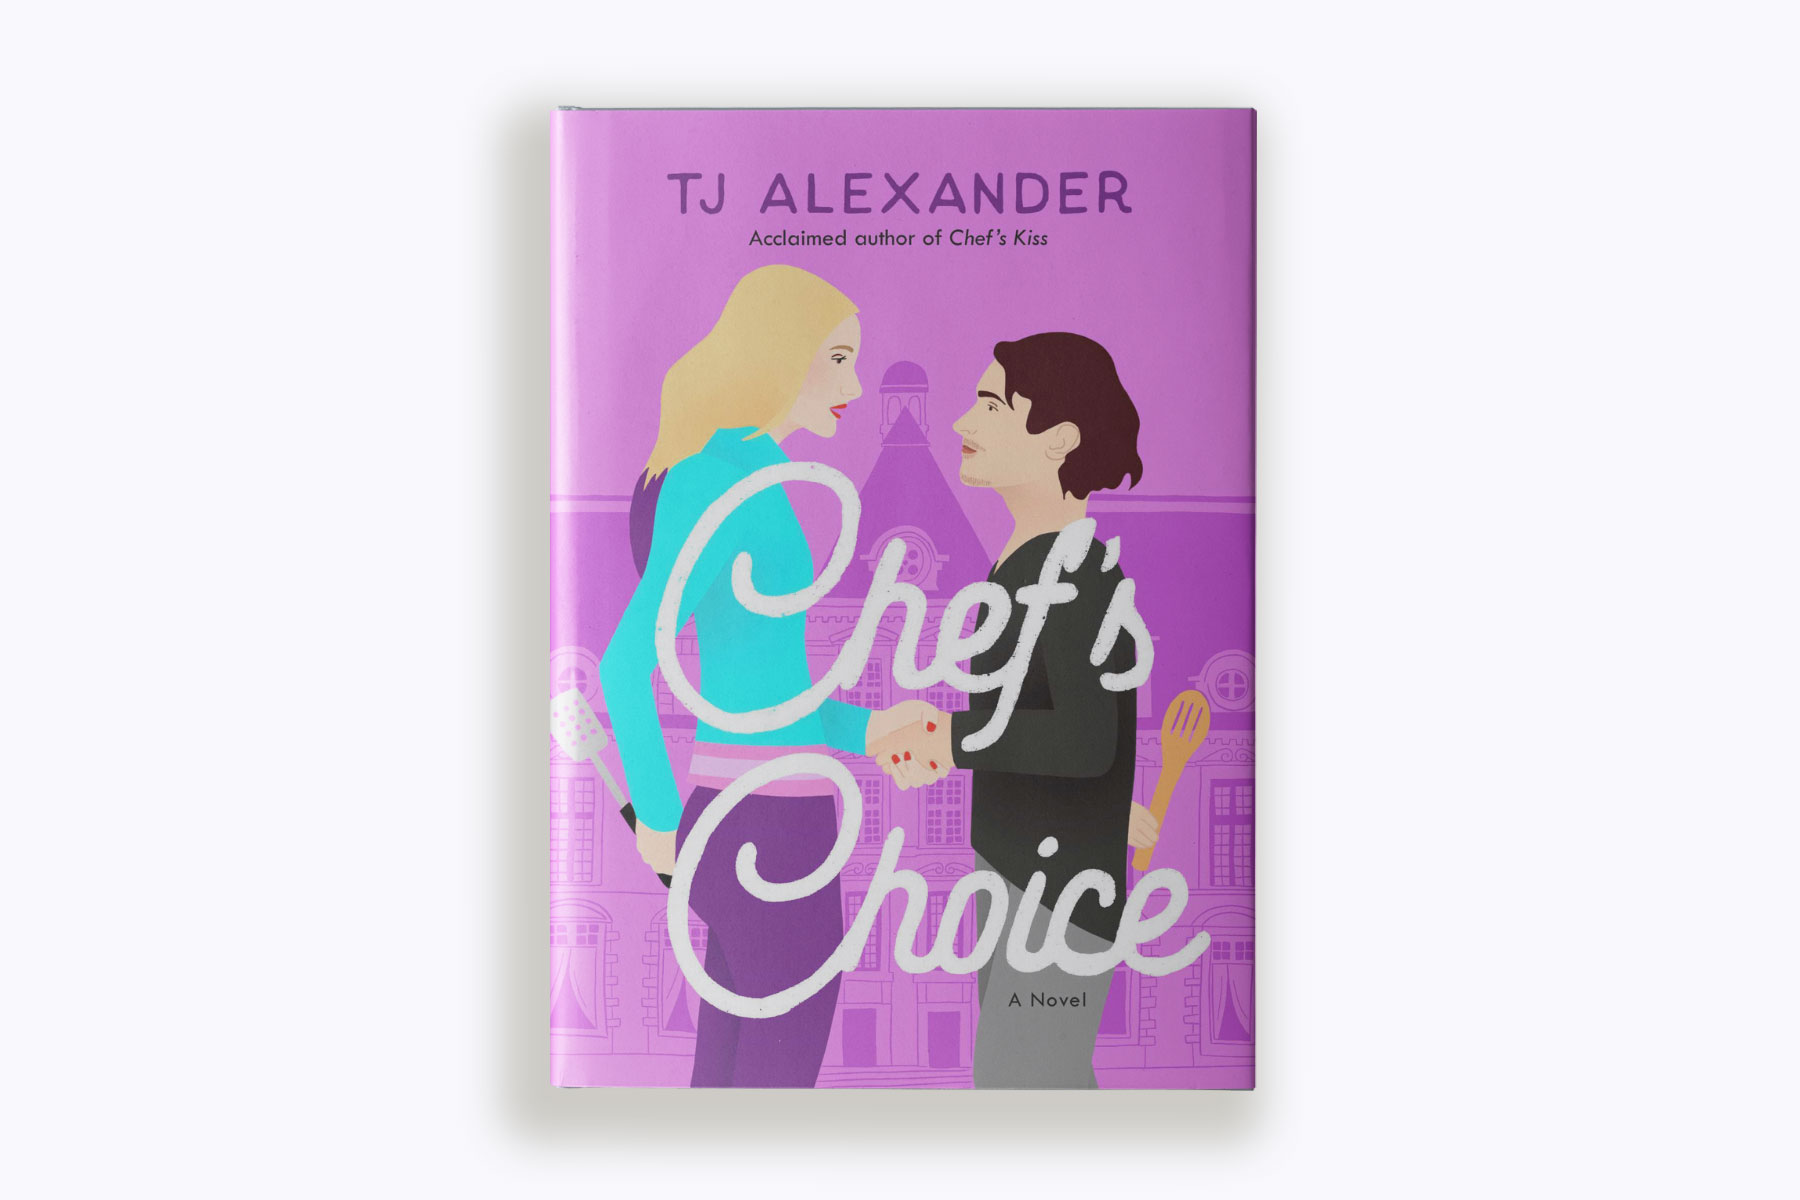 An image of TJ Alexander's book, "Chef's Choice".